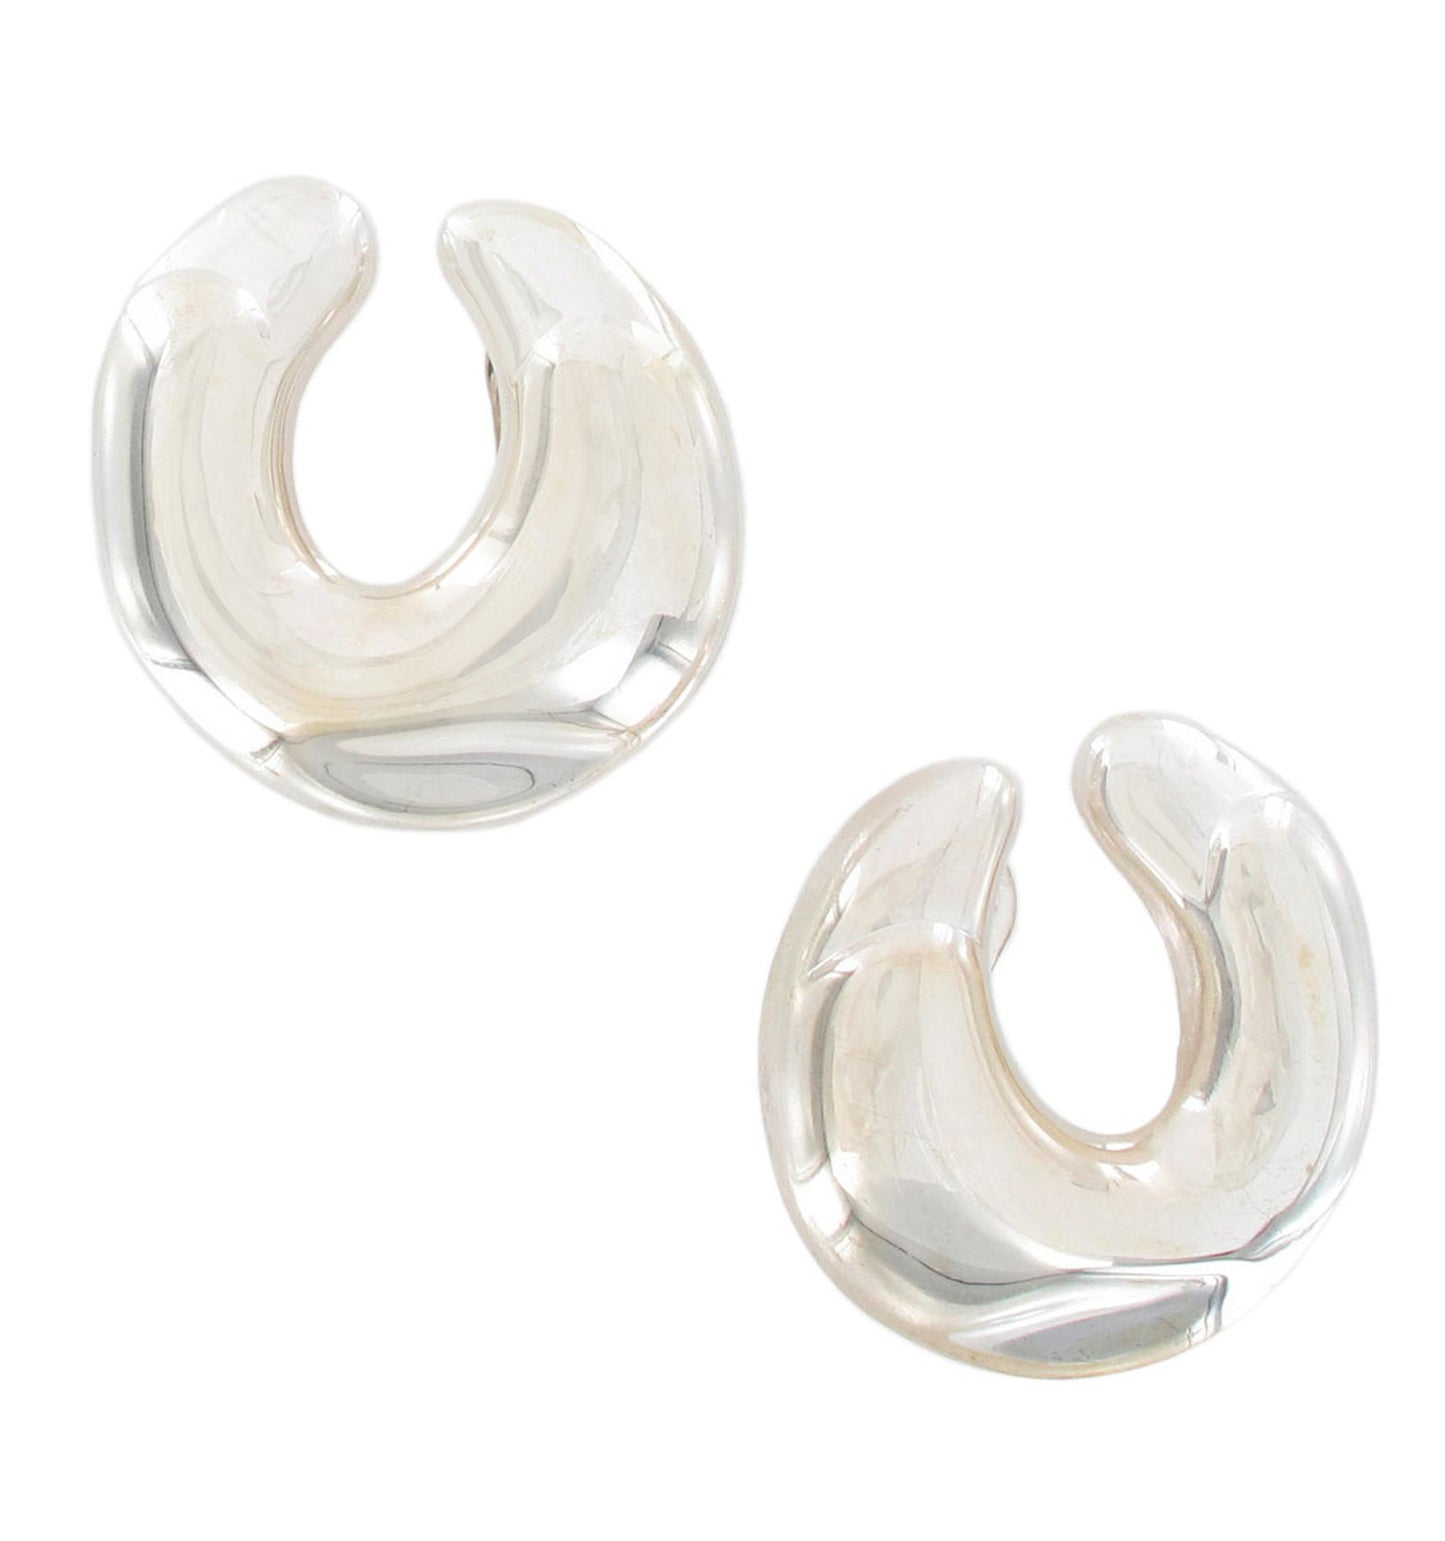 Clip On Earrings Biomorphic Abstract Horseshoe Silver Tone 1 1/4"